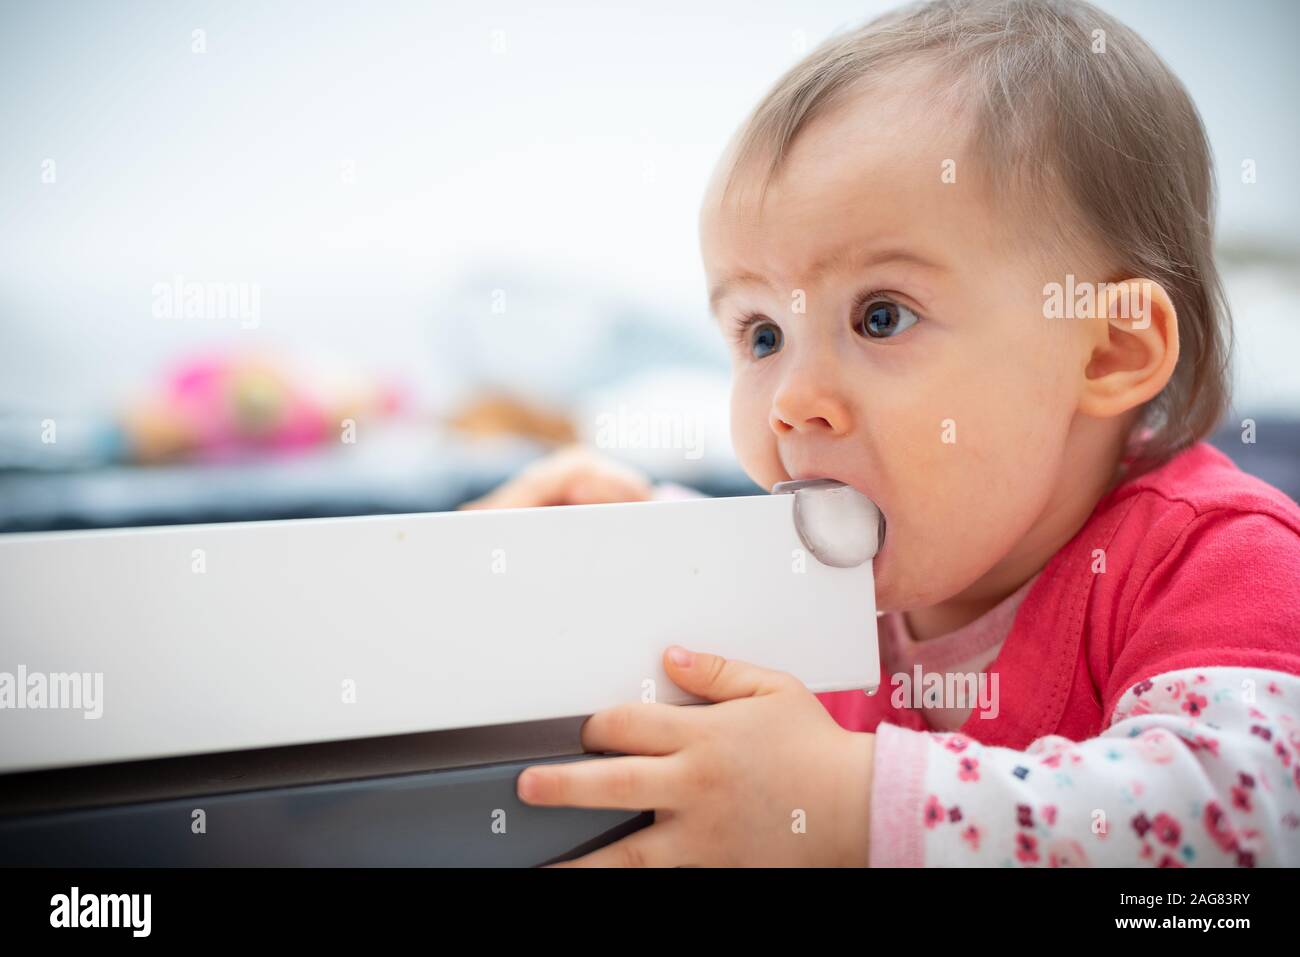 Cute caucasian 1 year old baby girl bites silicon corner protector, concept of teething, Child bites furniture Stock Photo